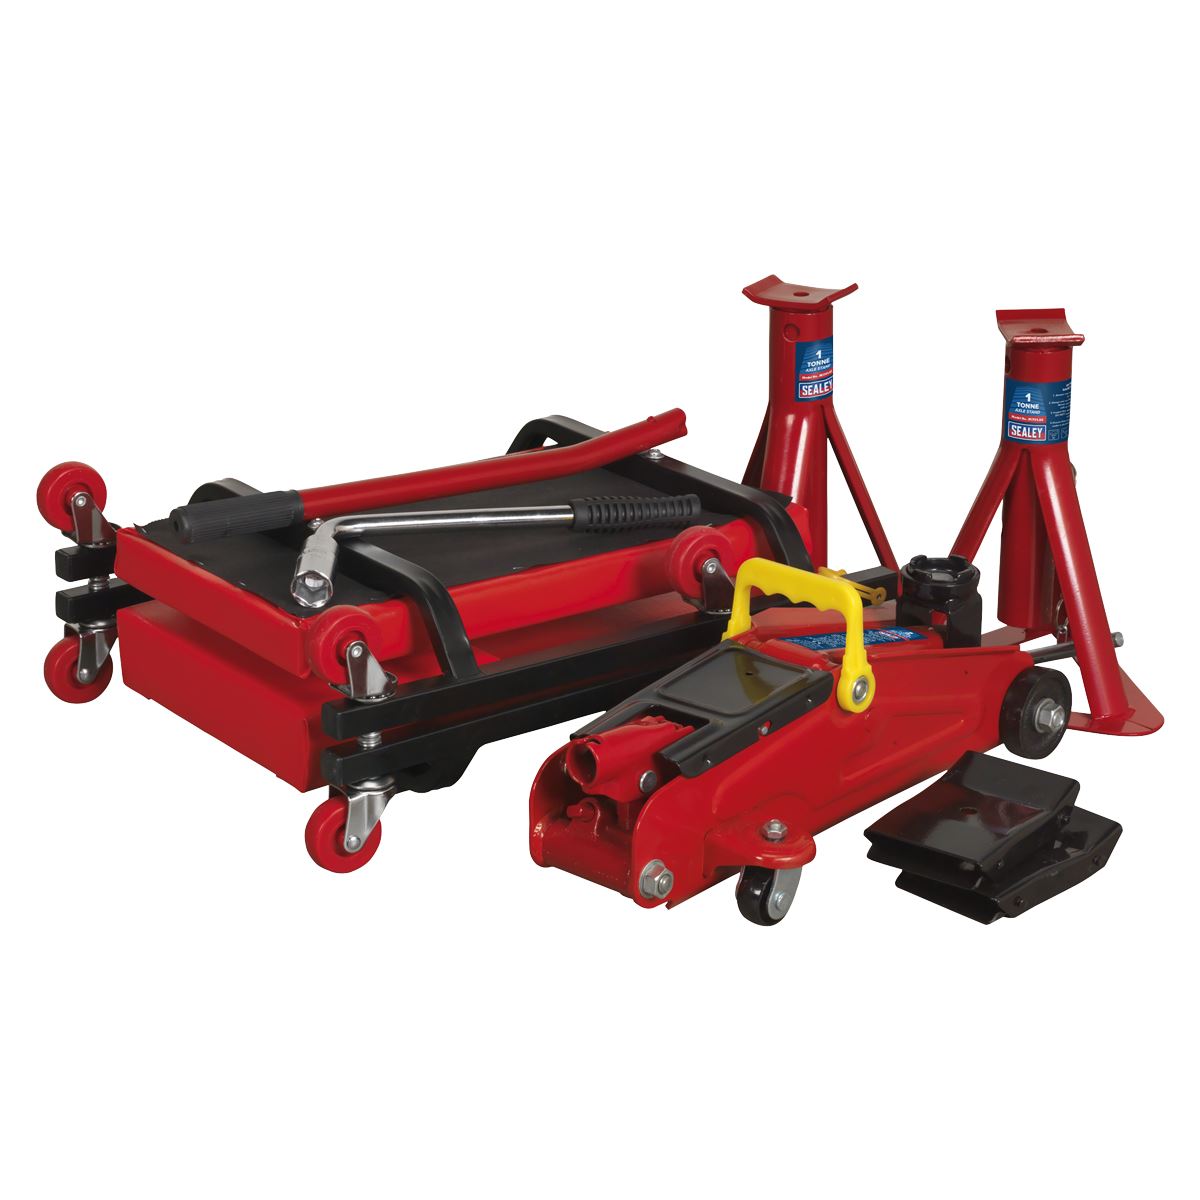 Sealey Lifting Kit (Inc Jack, Axle Stands, Creeper, Chocks & Wrench) 5pc - 2 Tonne